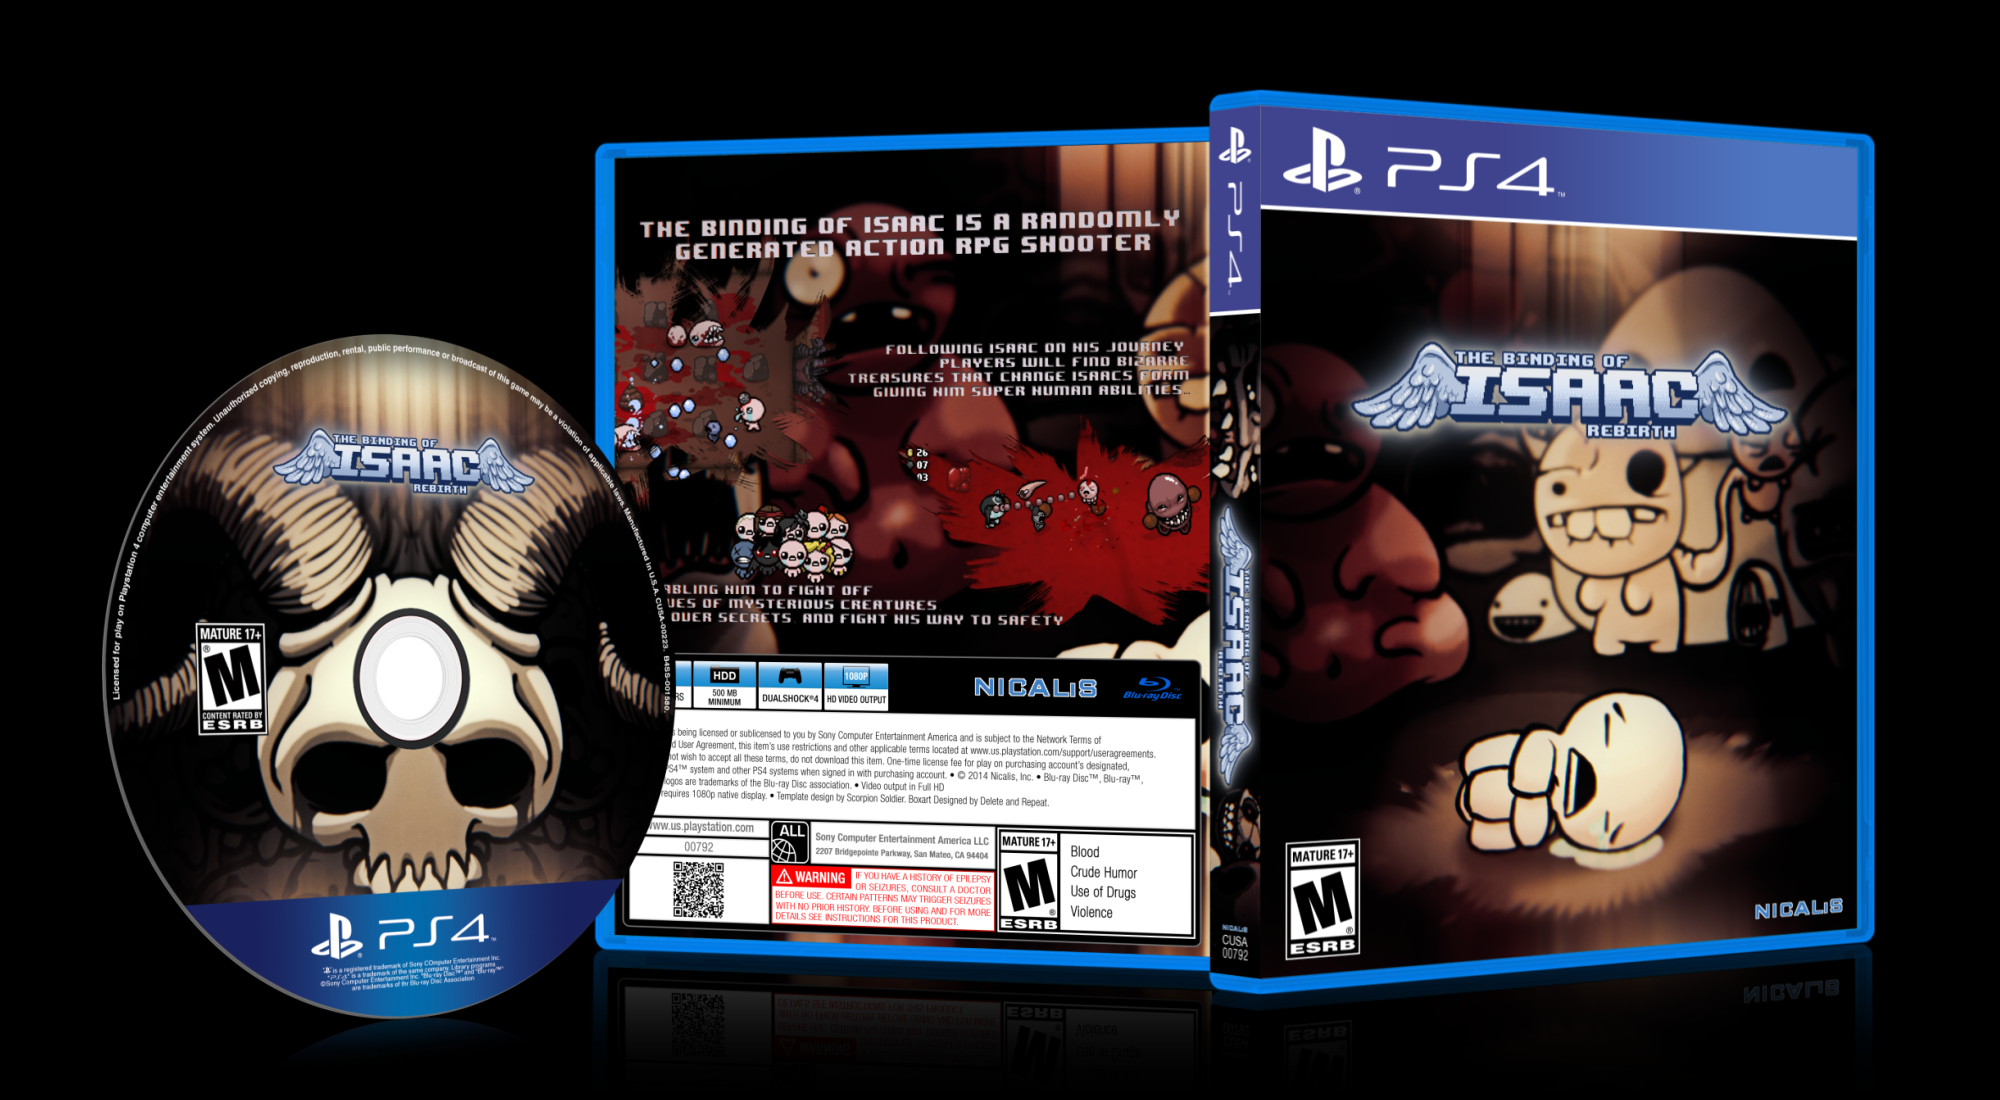 The Binding Of Isaac: Rebirth box cover